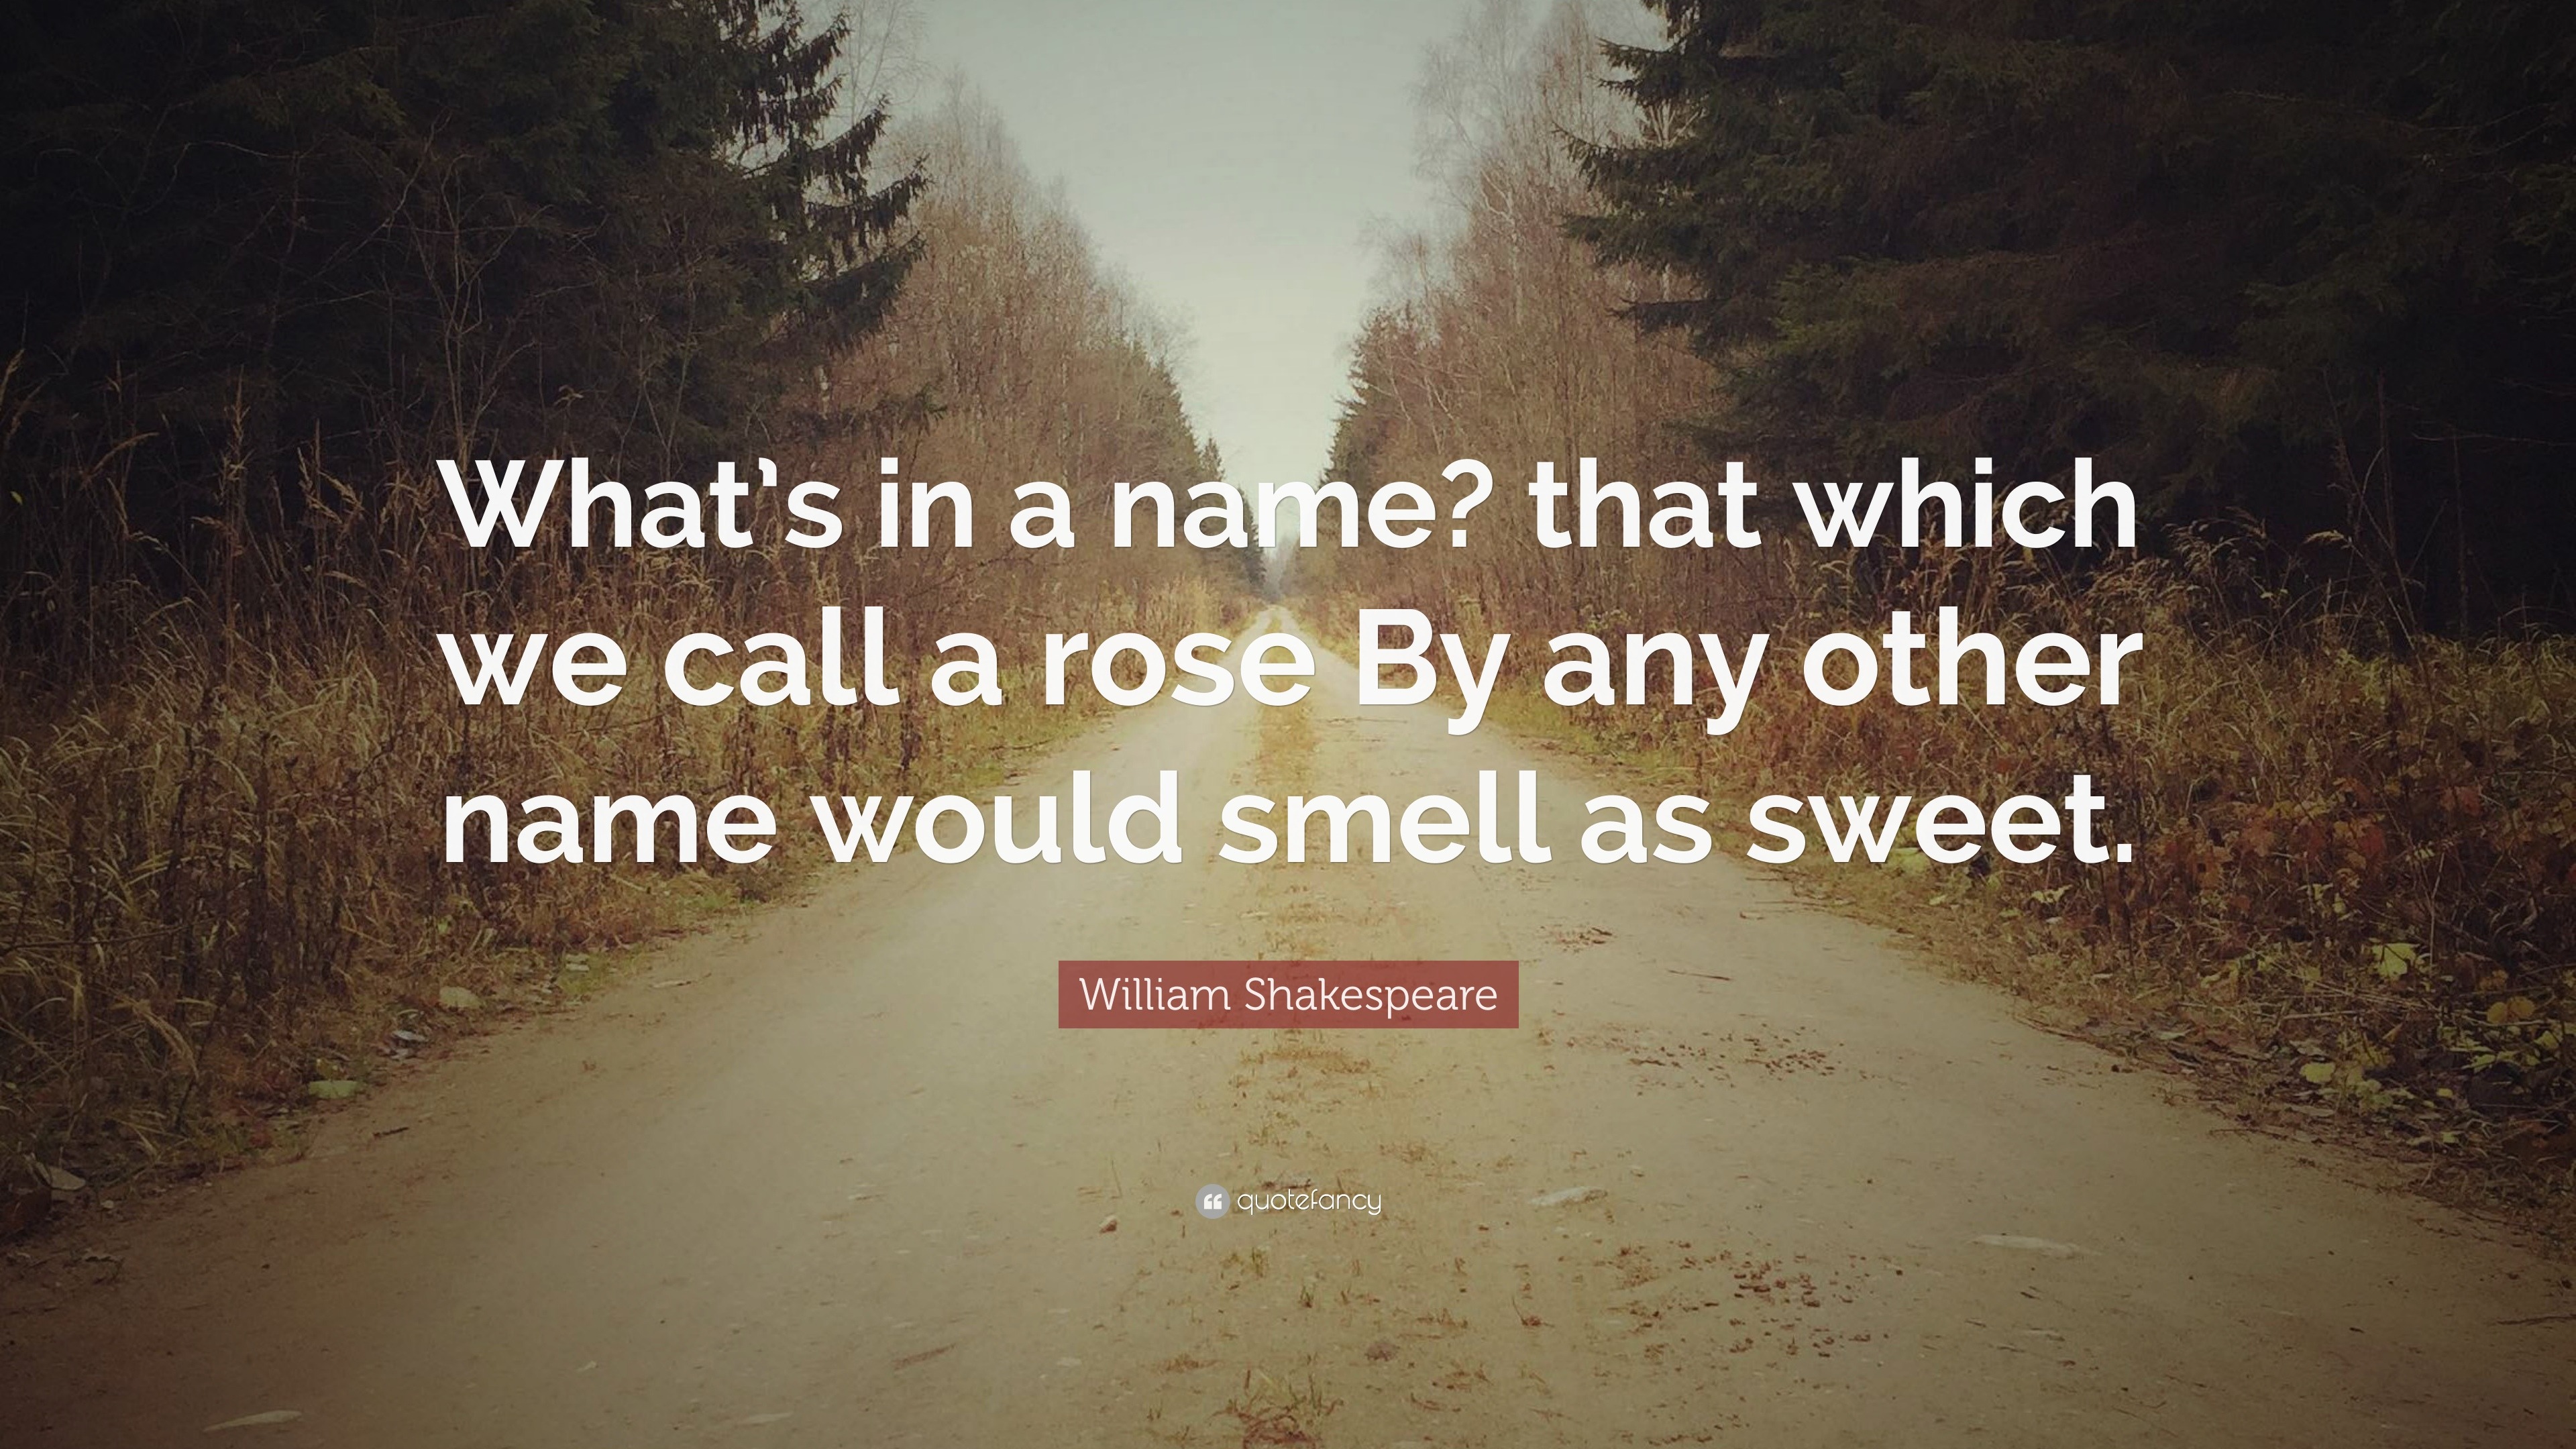 William Shakespeare Quote: “What’s in a name? that which we call a rose